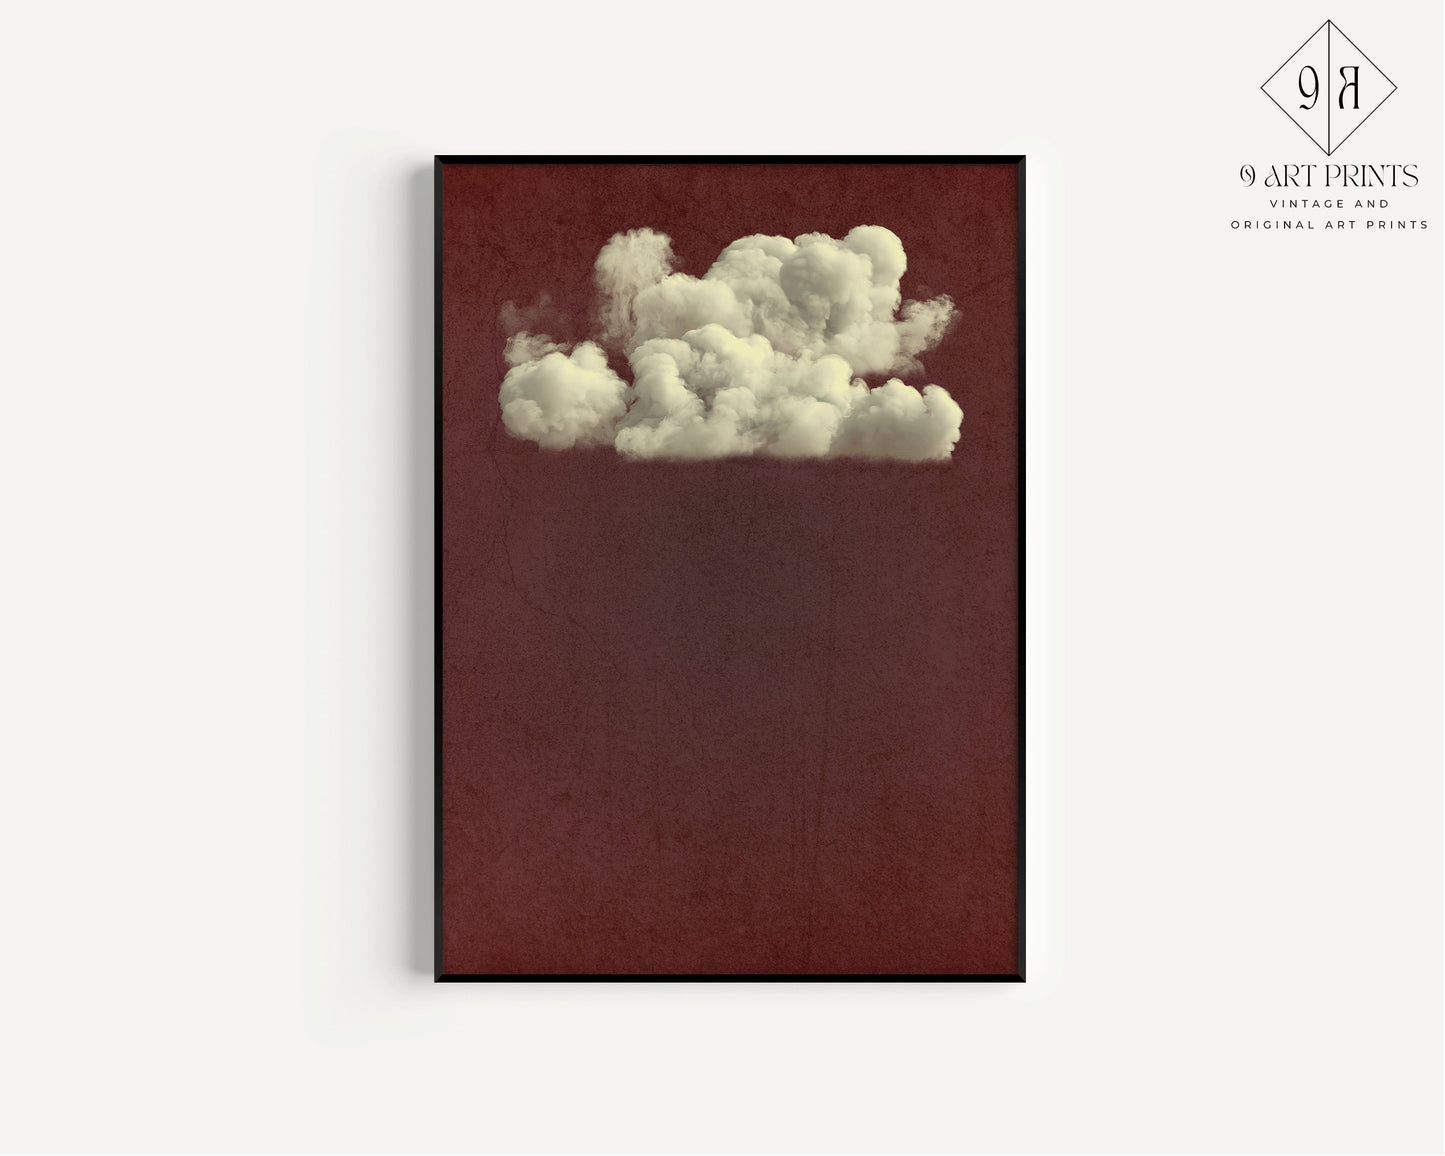 Framed Moody Vintage Clouds Dark Red Wall Art Academia Study Classic Modern Gallery Landscape Ready to Hang Home Office Decor